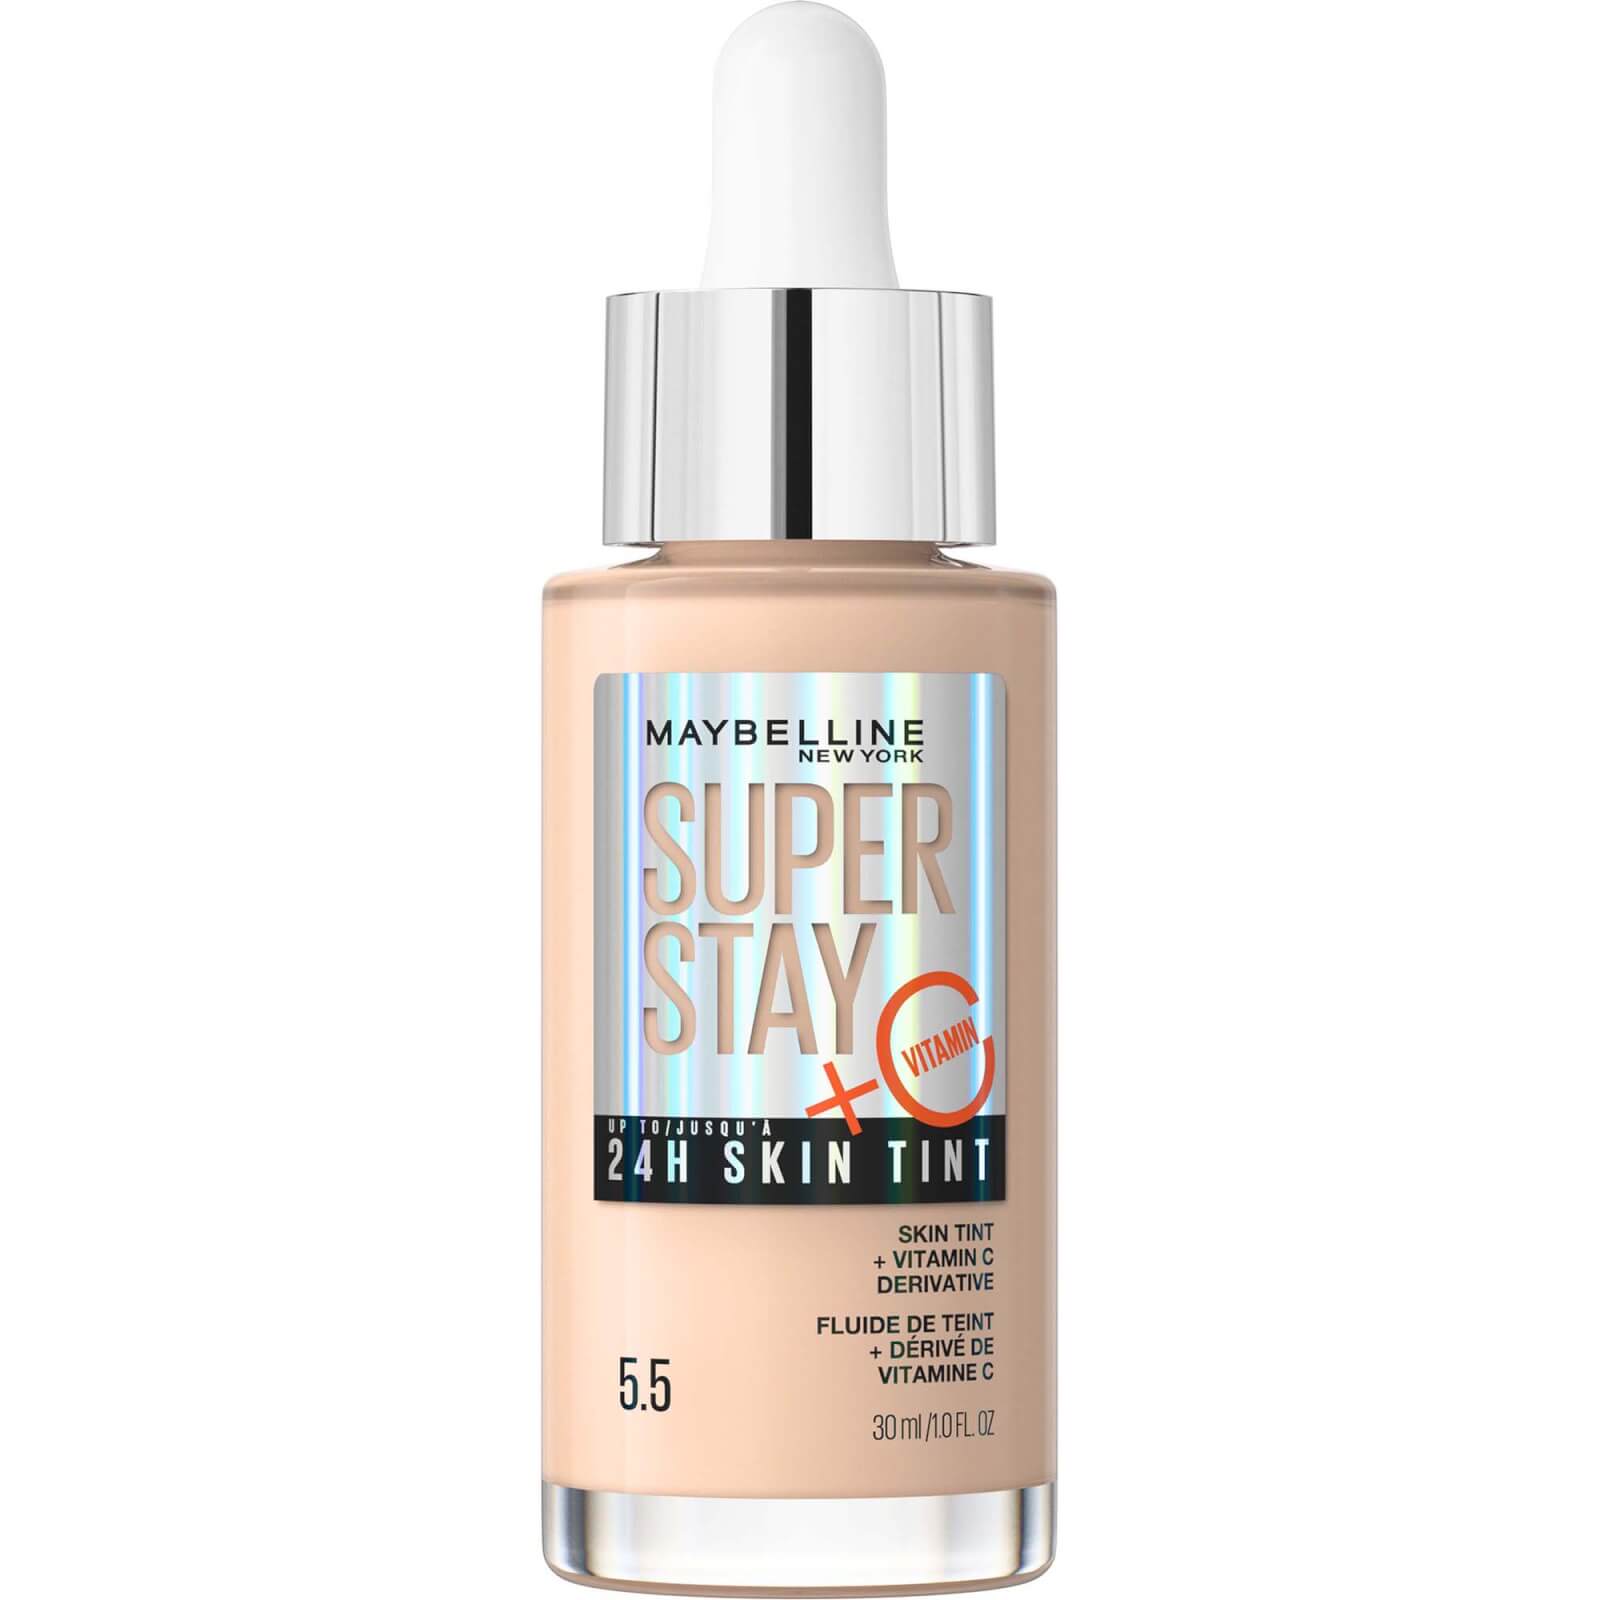 Maybelline Super Stay Up To 24h Skin Tint Foundation + Vitamin C 30ml (various Shades) - 5.5 In Neutral